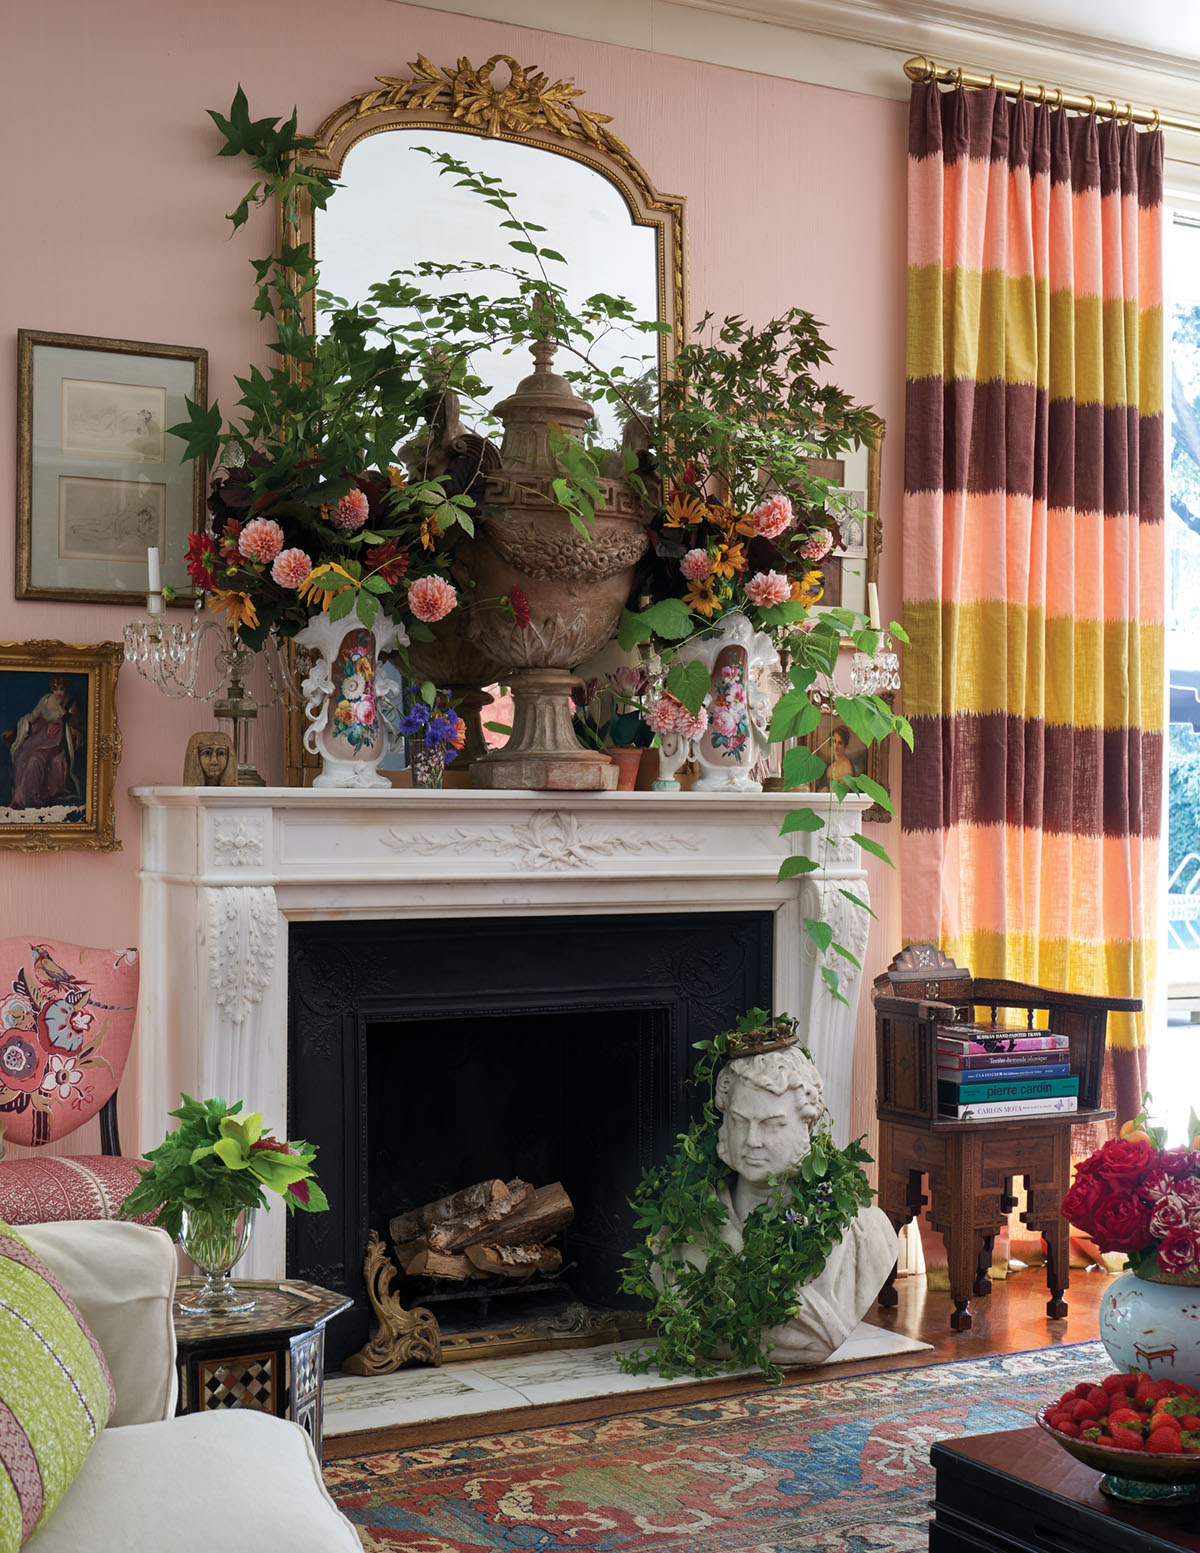 Michelle Nussbaumer’s house, mantel covered in vases of lush floral arrangements, gilt mirror, pink walls, oriental rug, and drapery panels with horizontal strips of pink, green, and chocolate brown